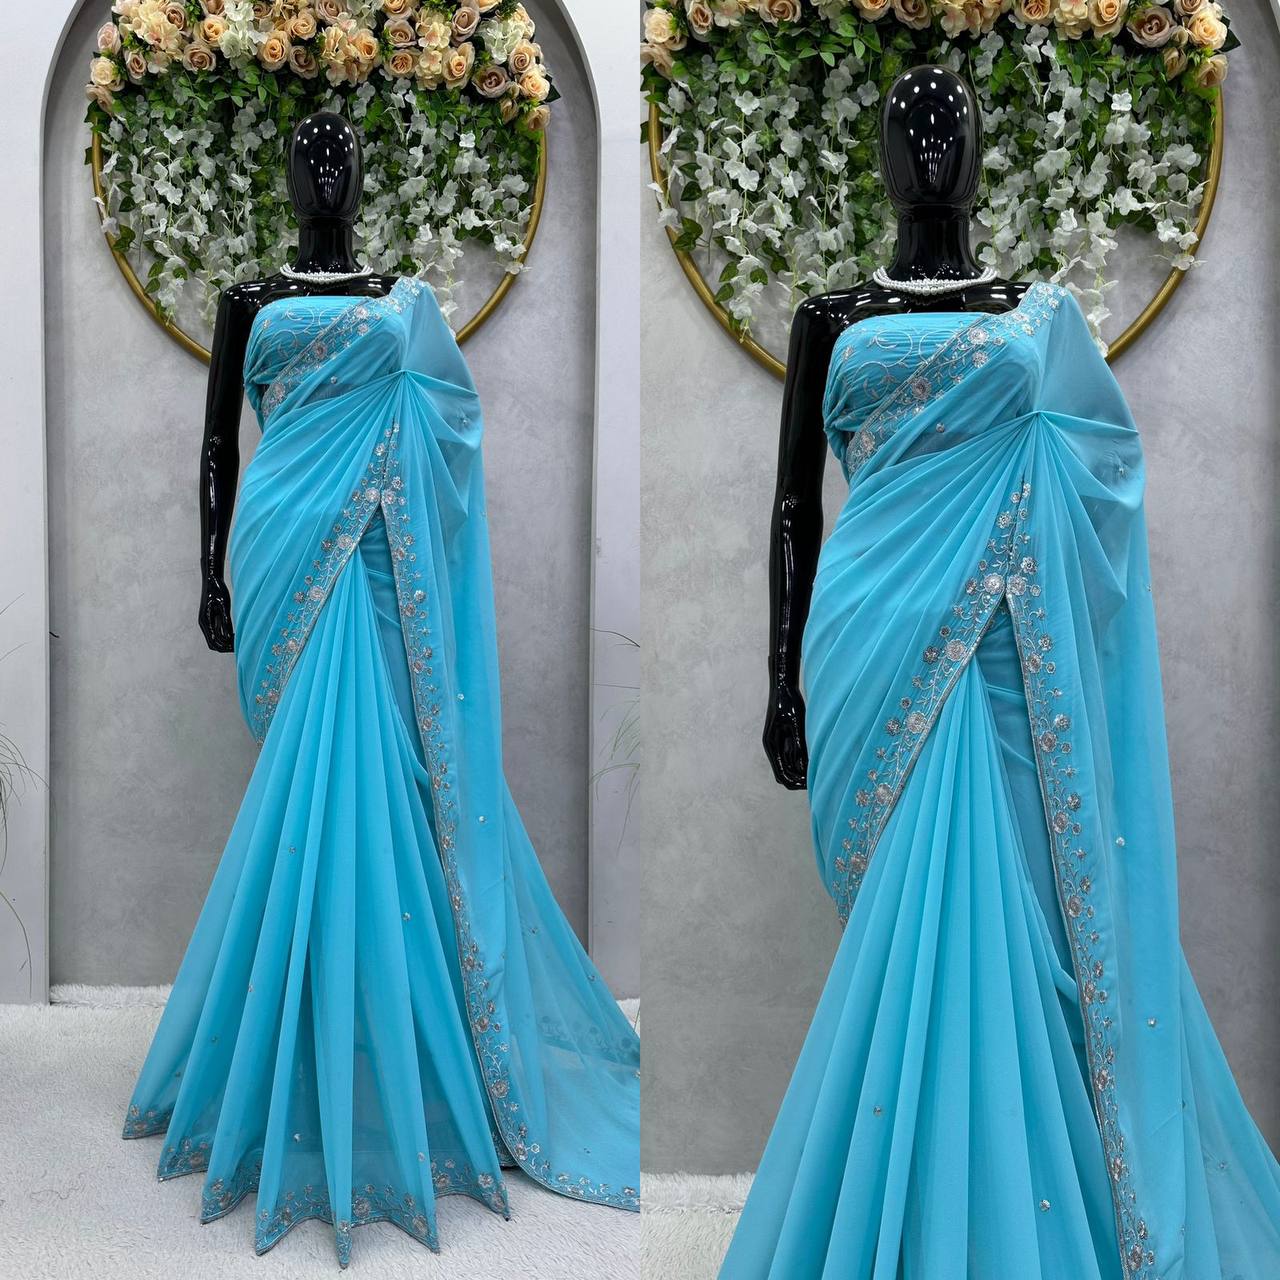 Women's Beautiful Thread & Sequence Work Cyan Blue Faux Georgette Designer Saree With Blouse